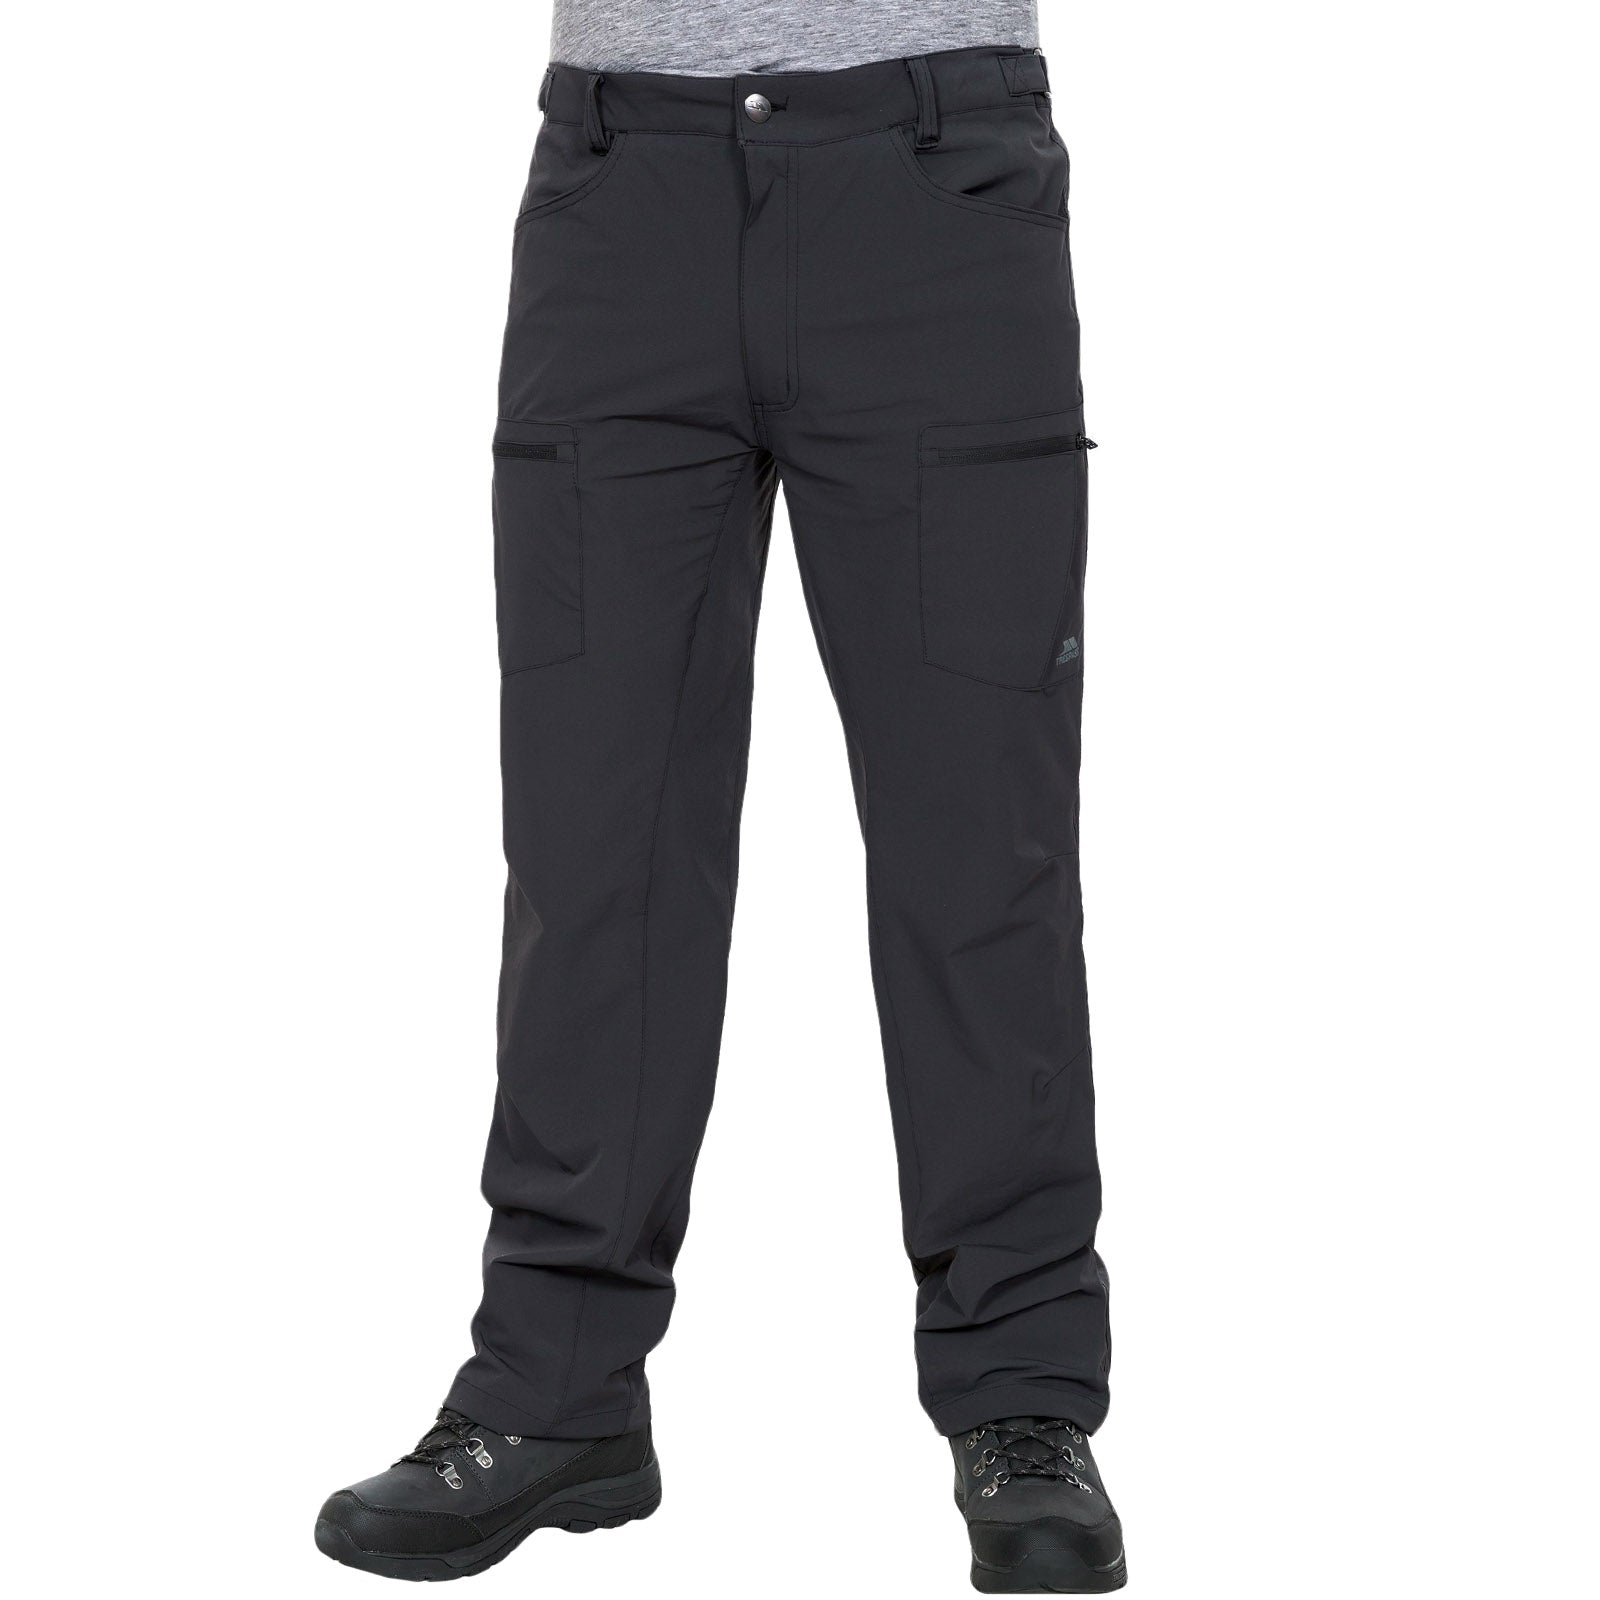 Fashion Quick Dry Cargo Pants Men Summer Thin Outdoor Camping  Best Price  Online  Jumia Egypt